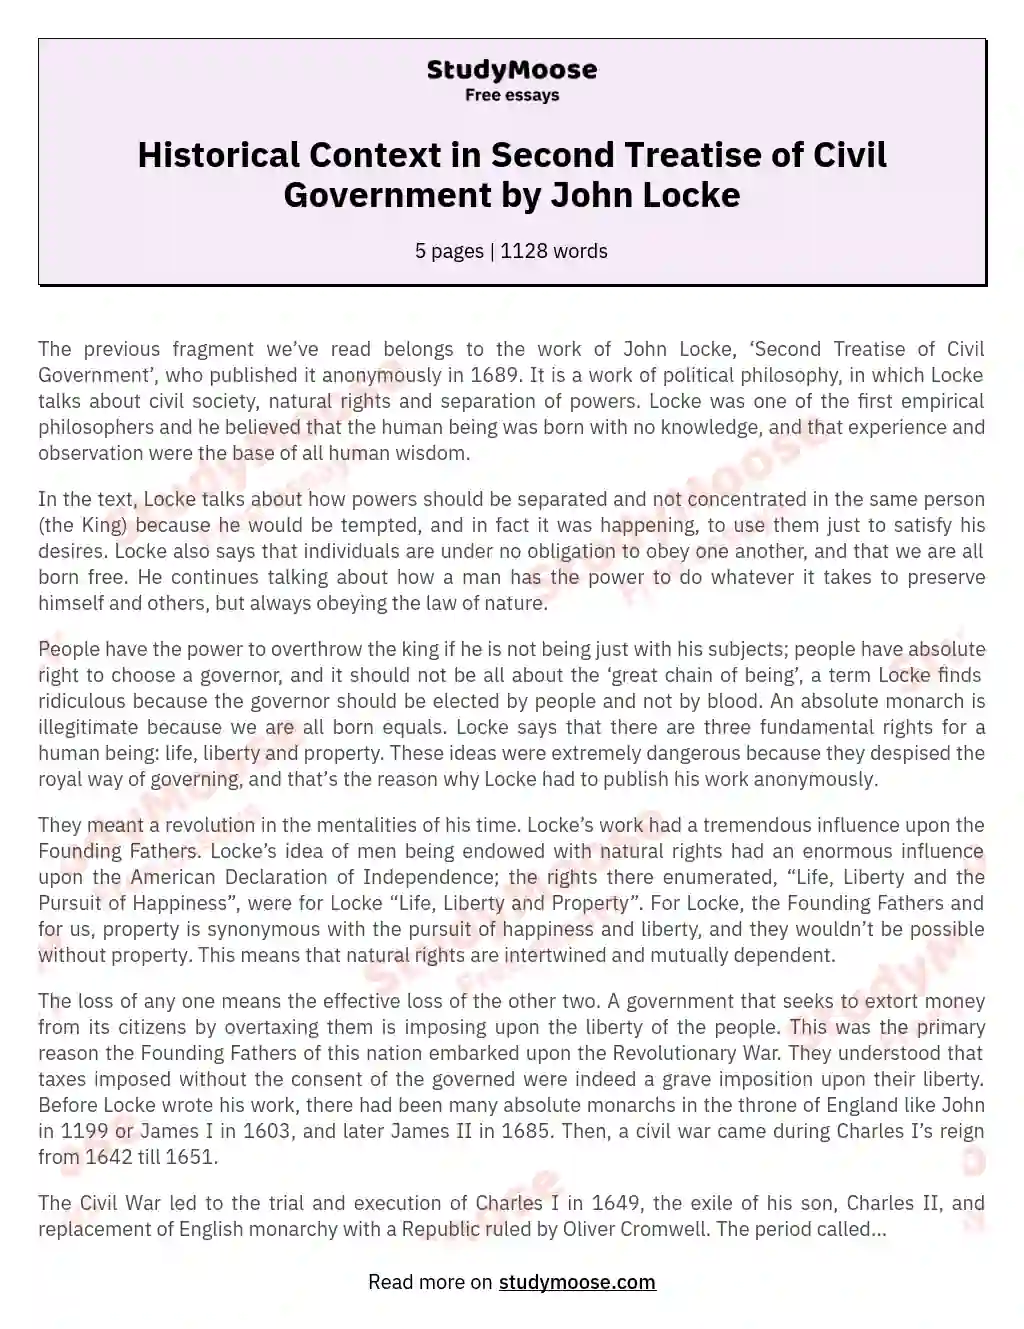 Analysis and Historical Context from Second Treatise of Civil Government by John Locke